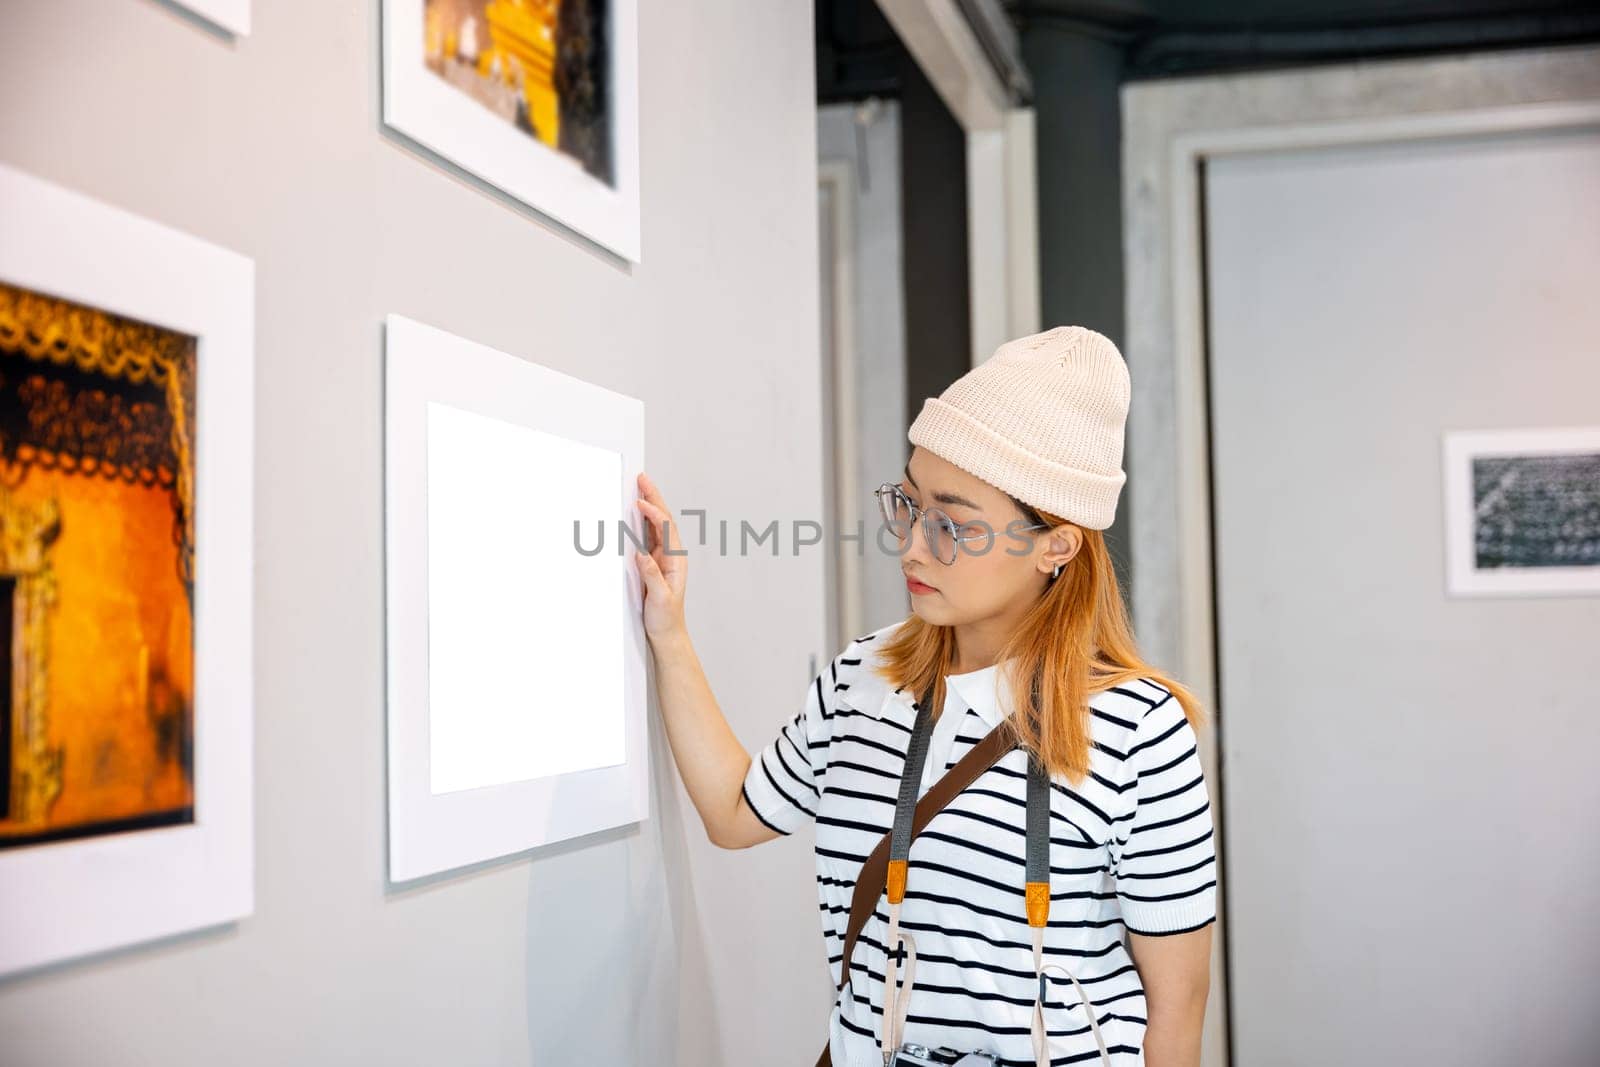 Photographer visit at photo frame to leaning against at show exhibit artwork gallery by Sorapop